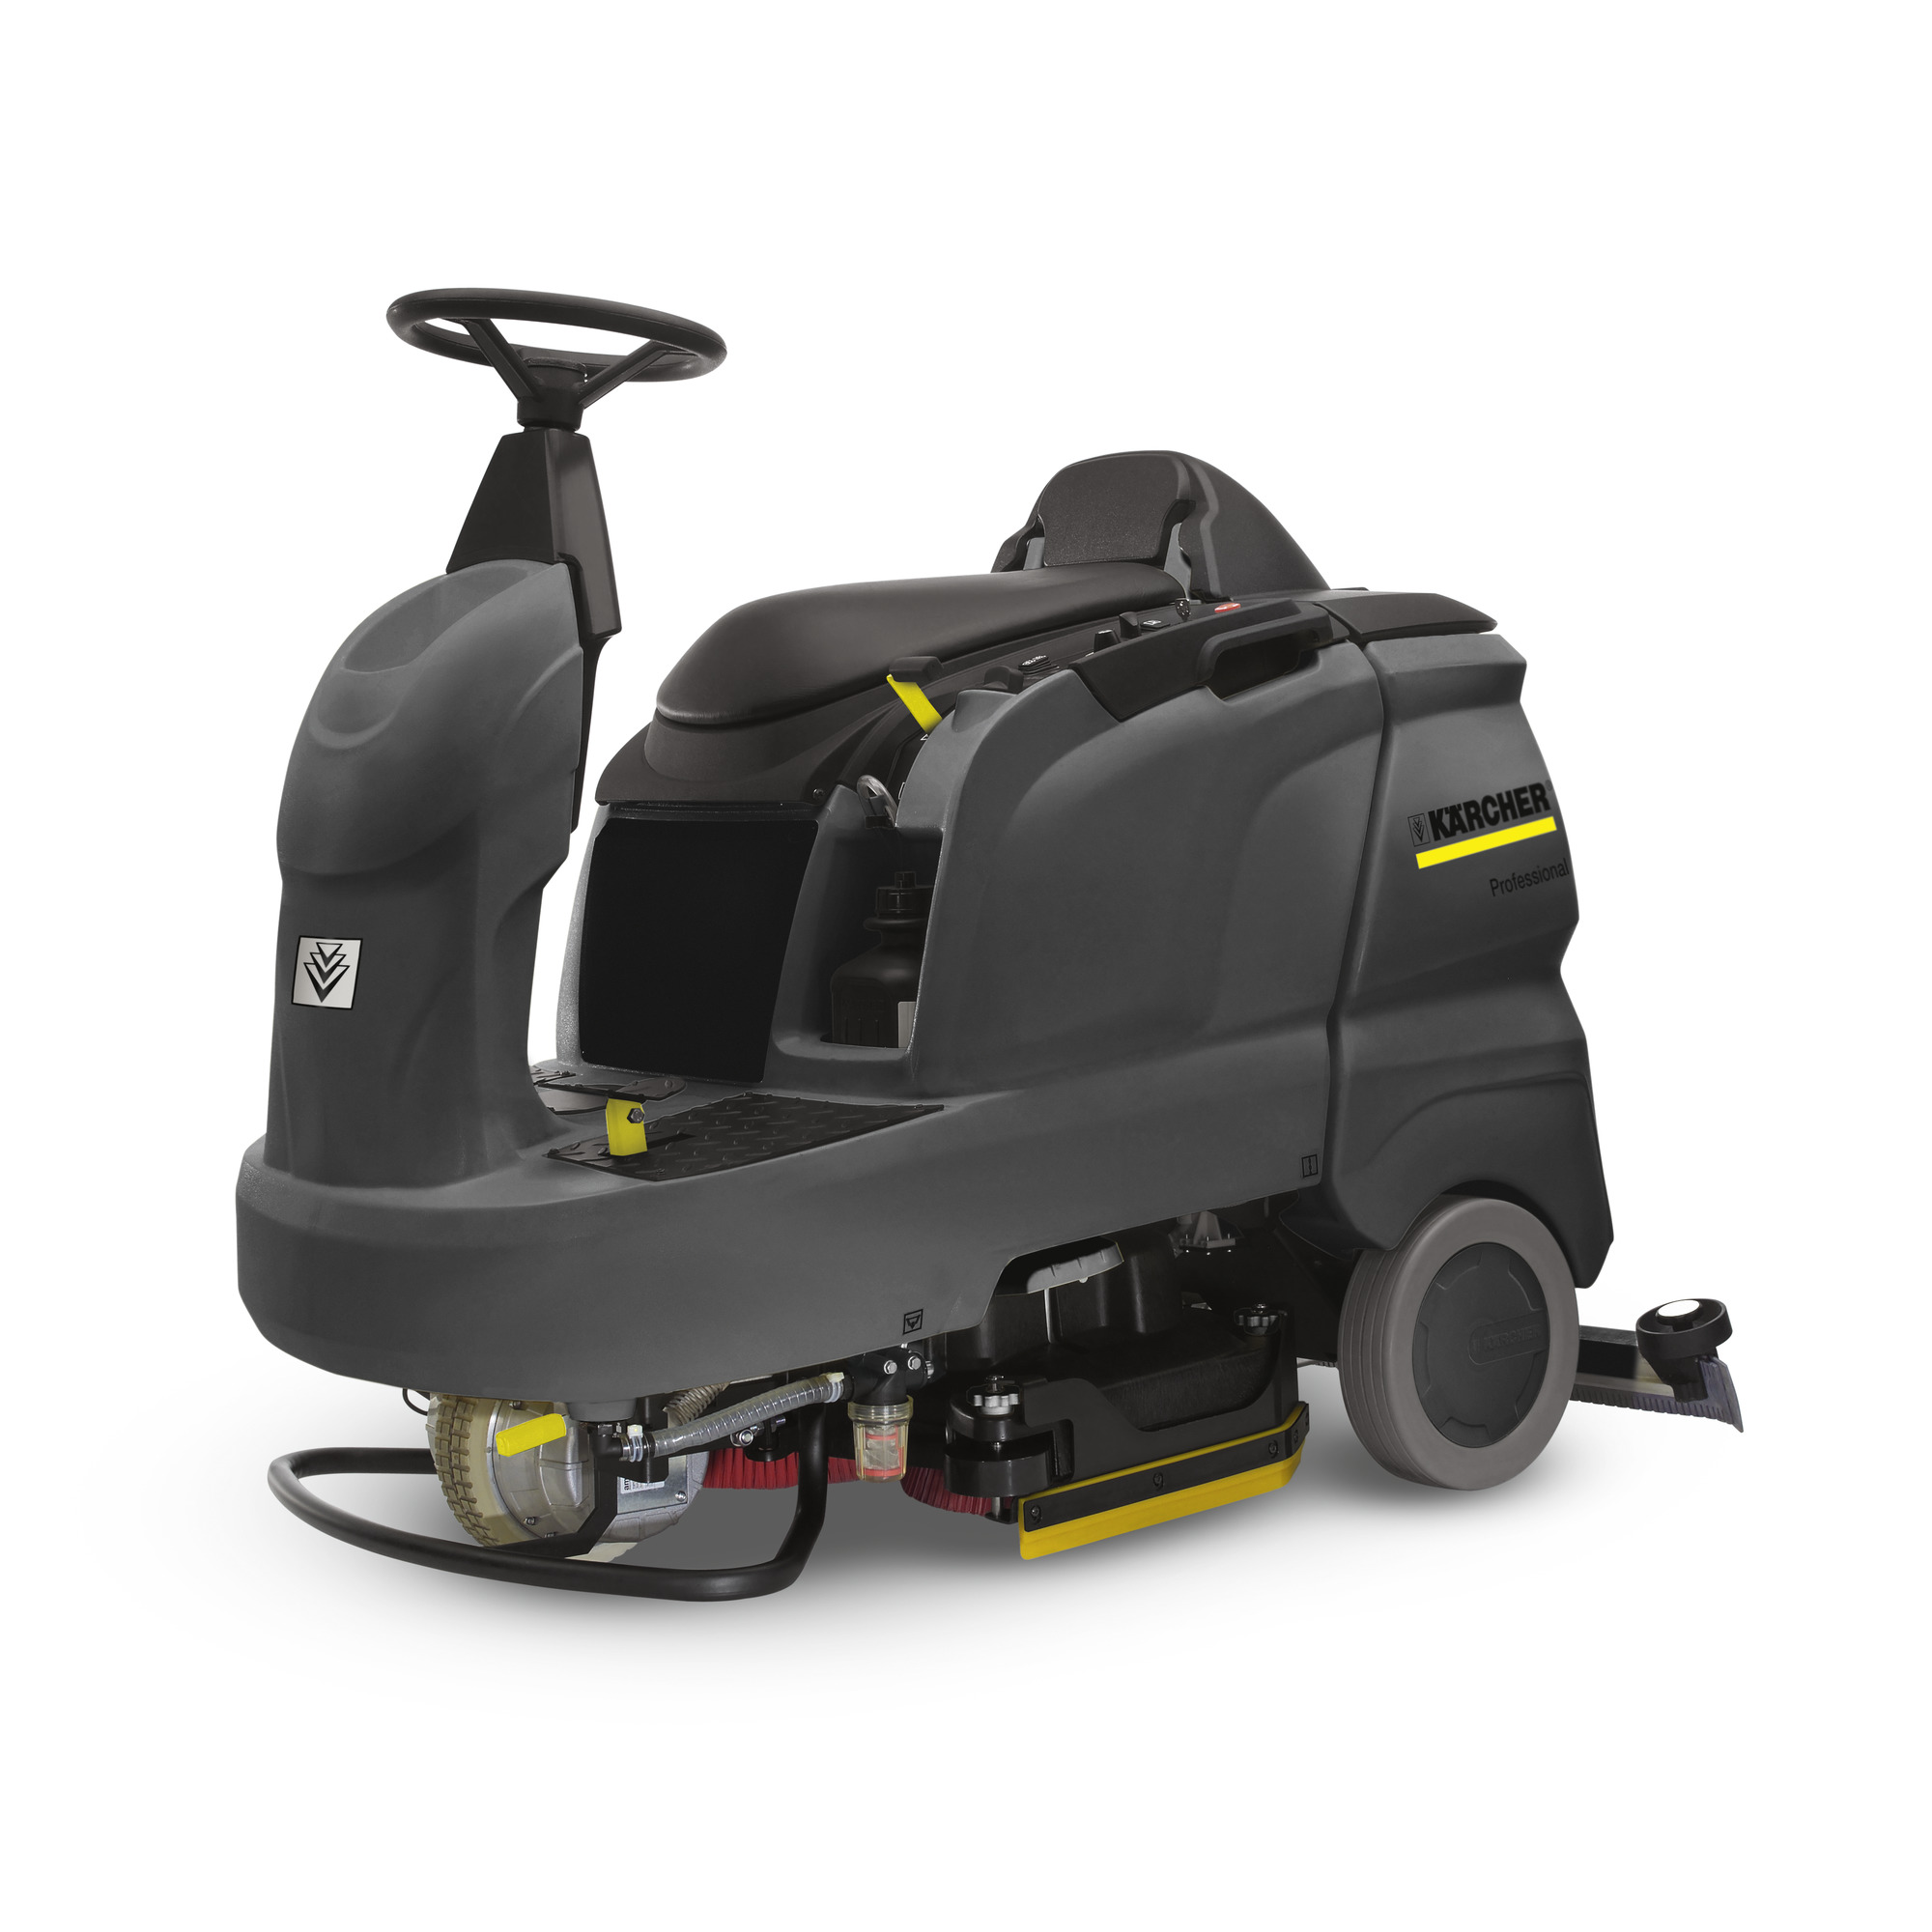 26&quot; B 90 R ADV BP, 24 GAL,
RIDE-ON SCRUBBER, 255AH AGM,
CHARGER, CURVED SQUEEGEE, NO
SCRUB DECK